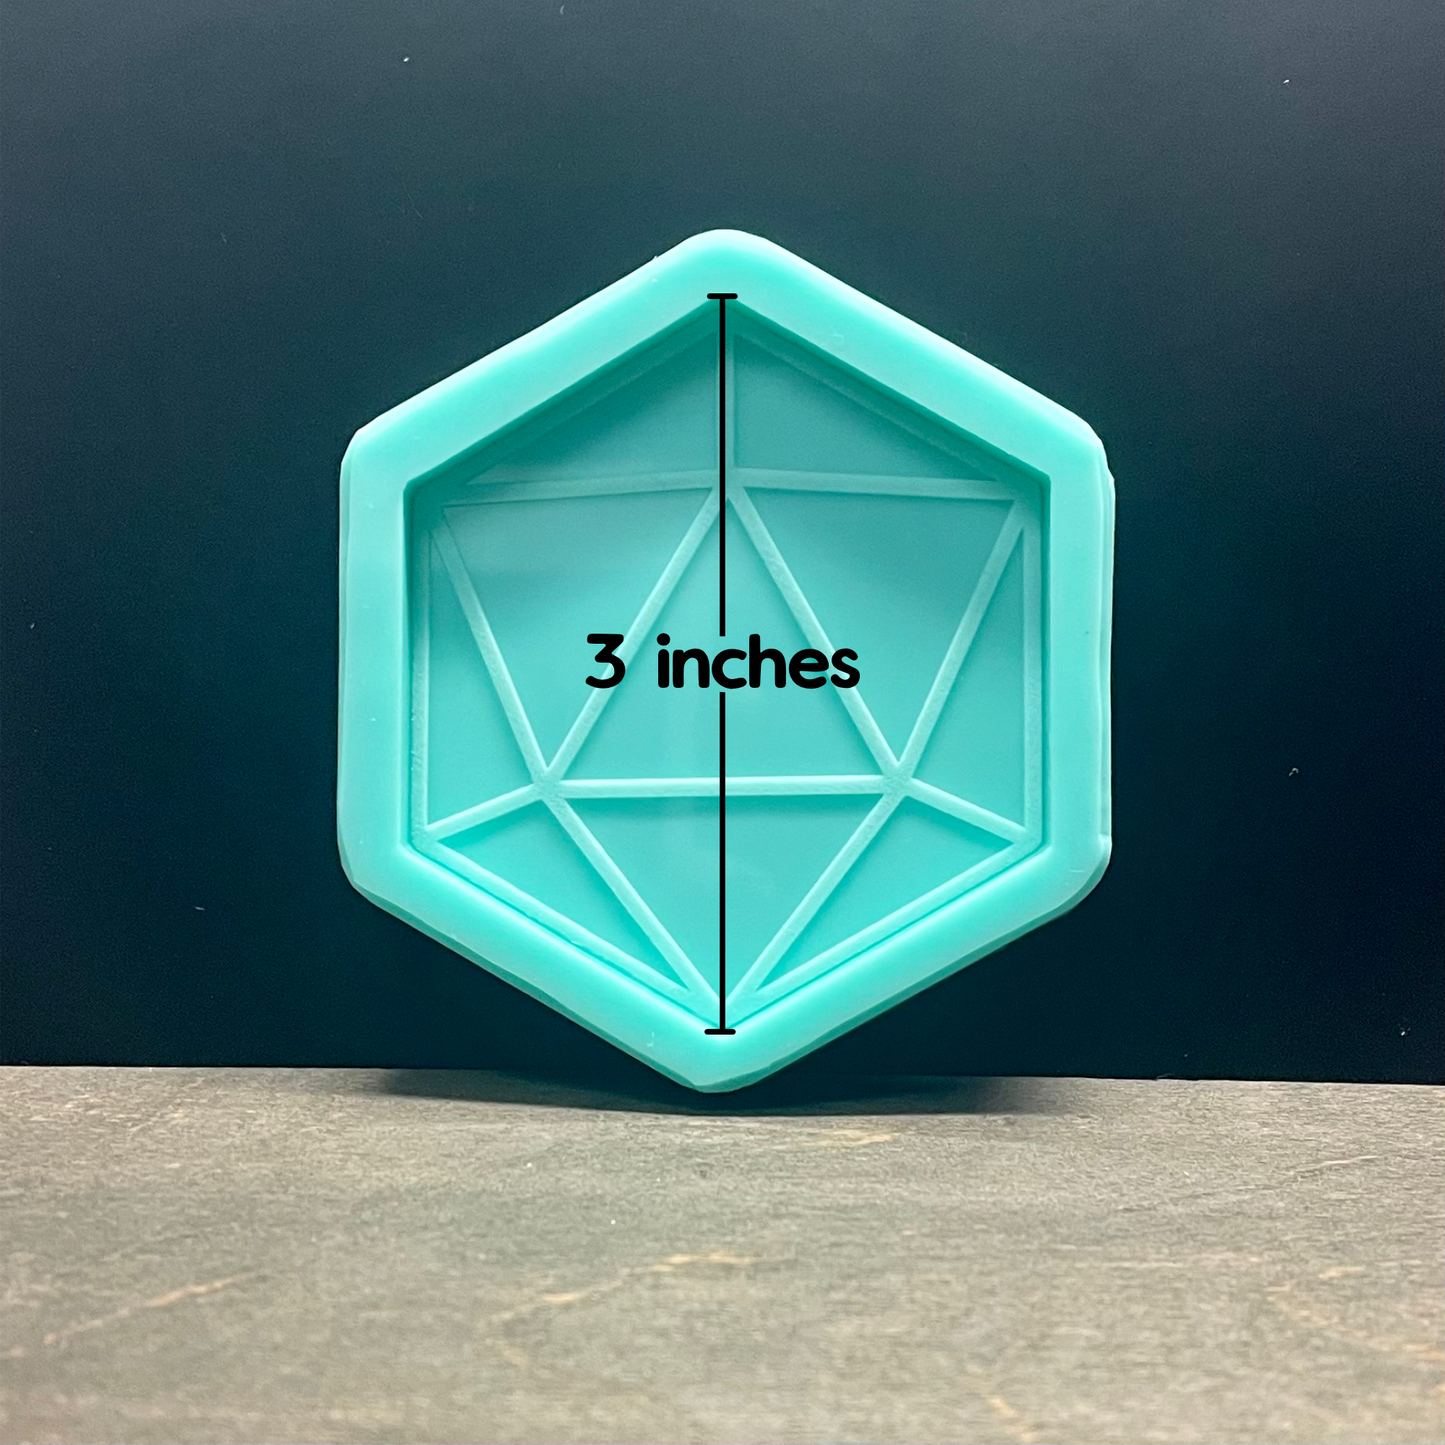 Lootcrate D20 Ice Mold New and Unused 20 Sided